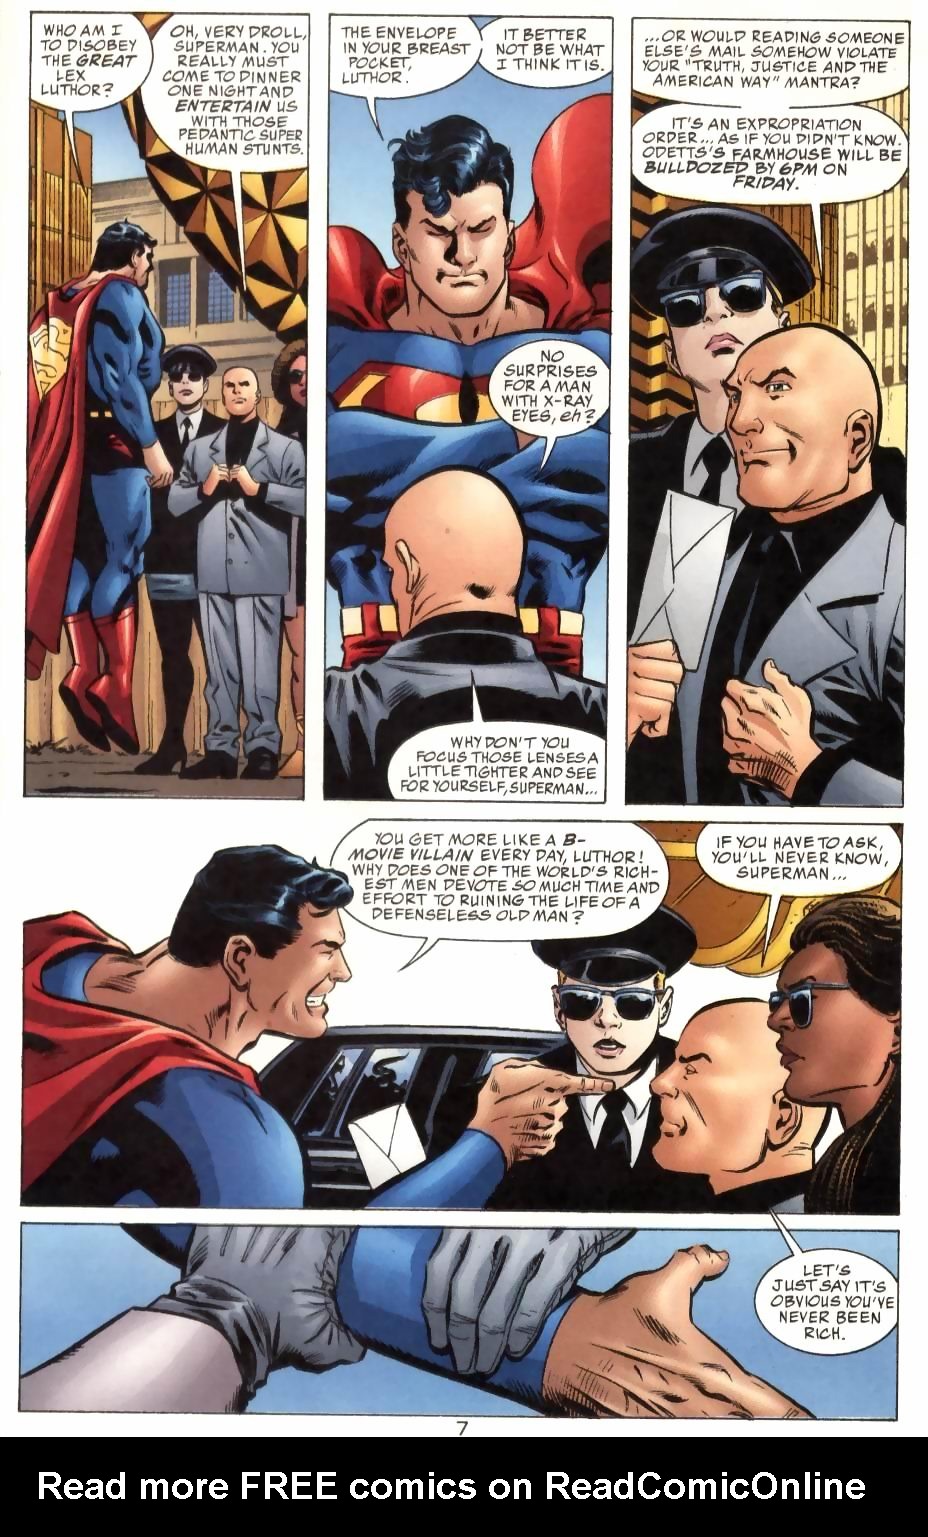 Adventures of Superman (1987) 573 Page 7